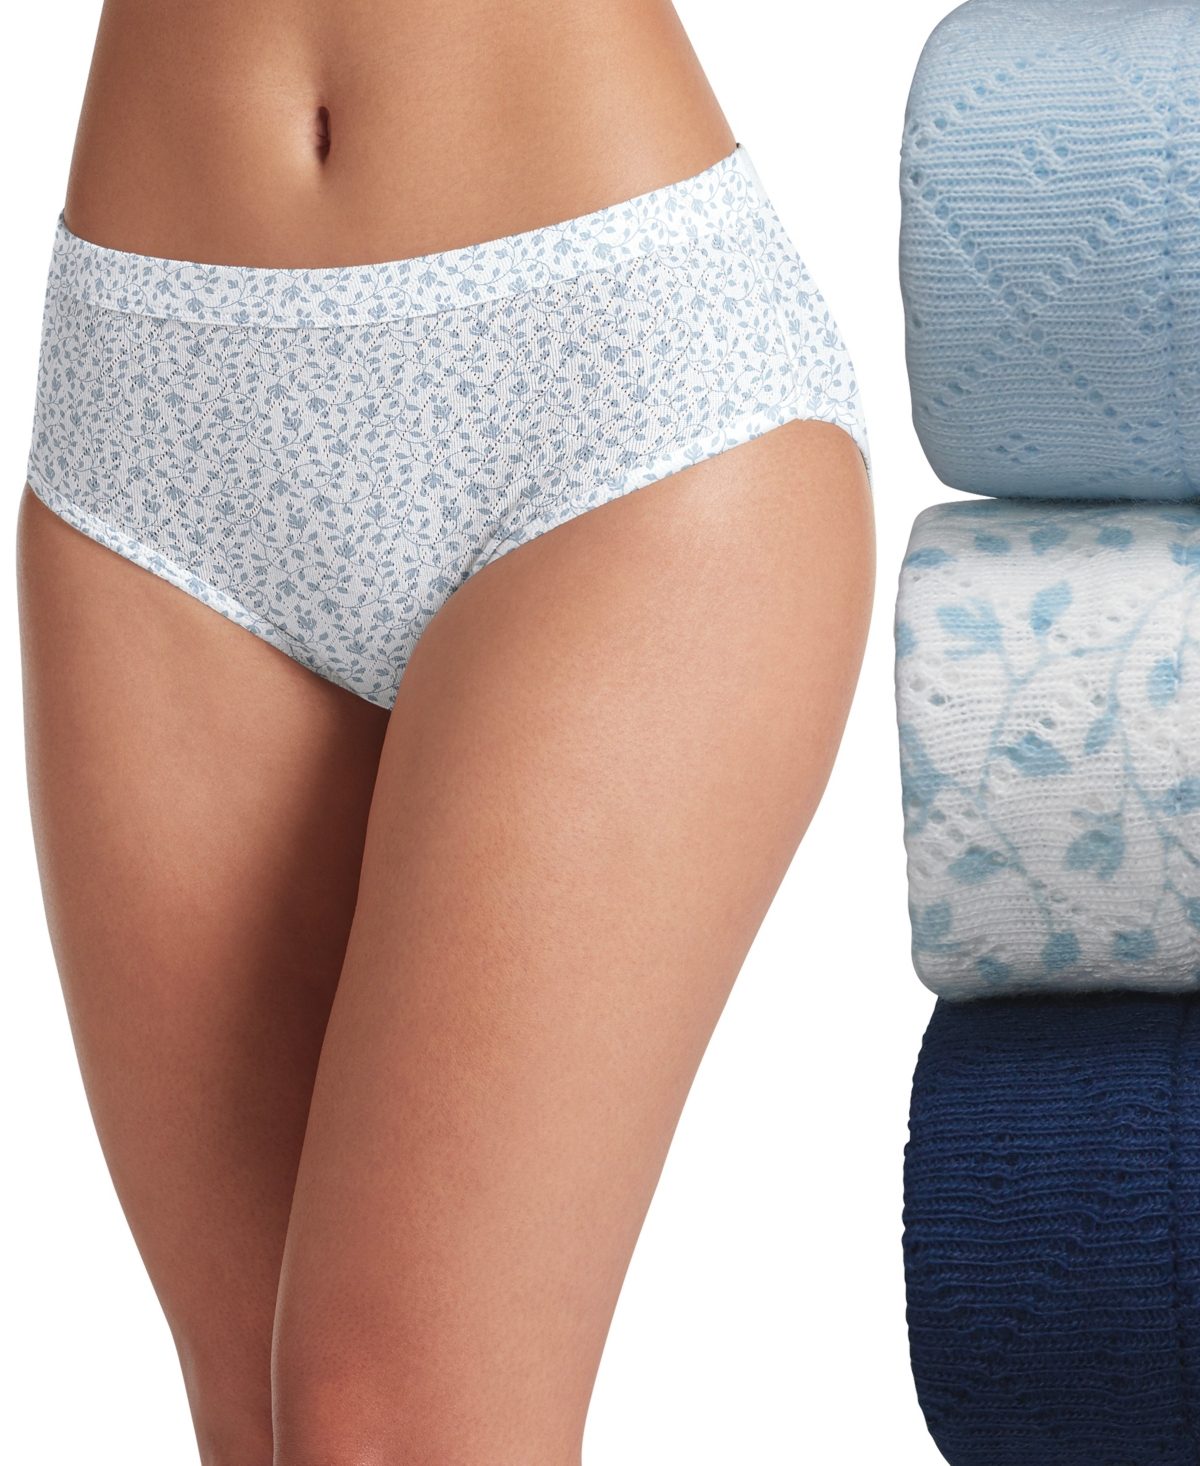 Elance Breathe Hipster Underwear 3 Pack 1540, also available in extended sizes - White